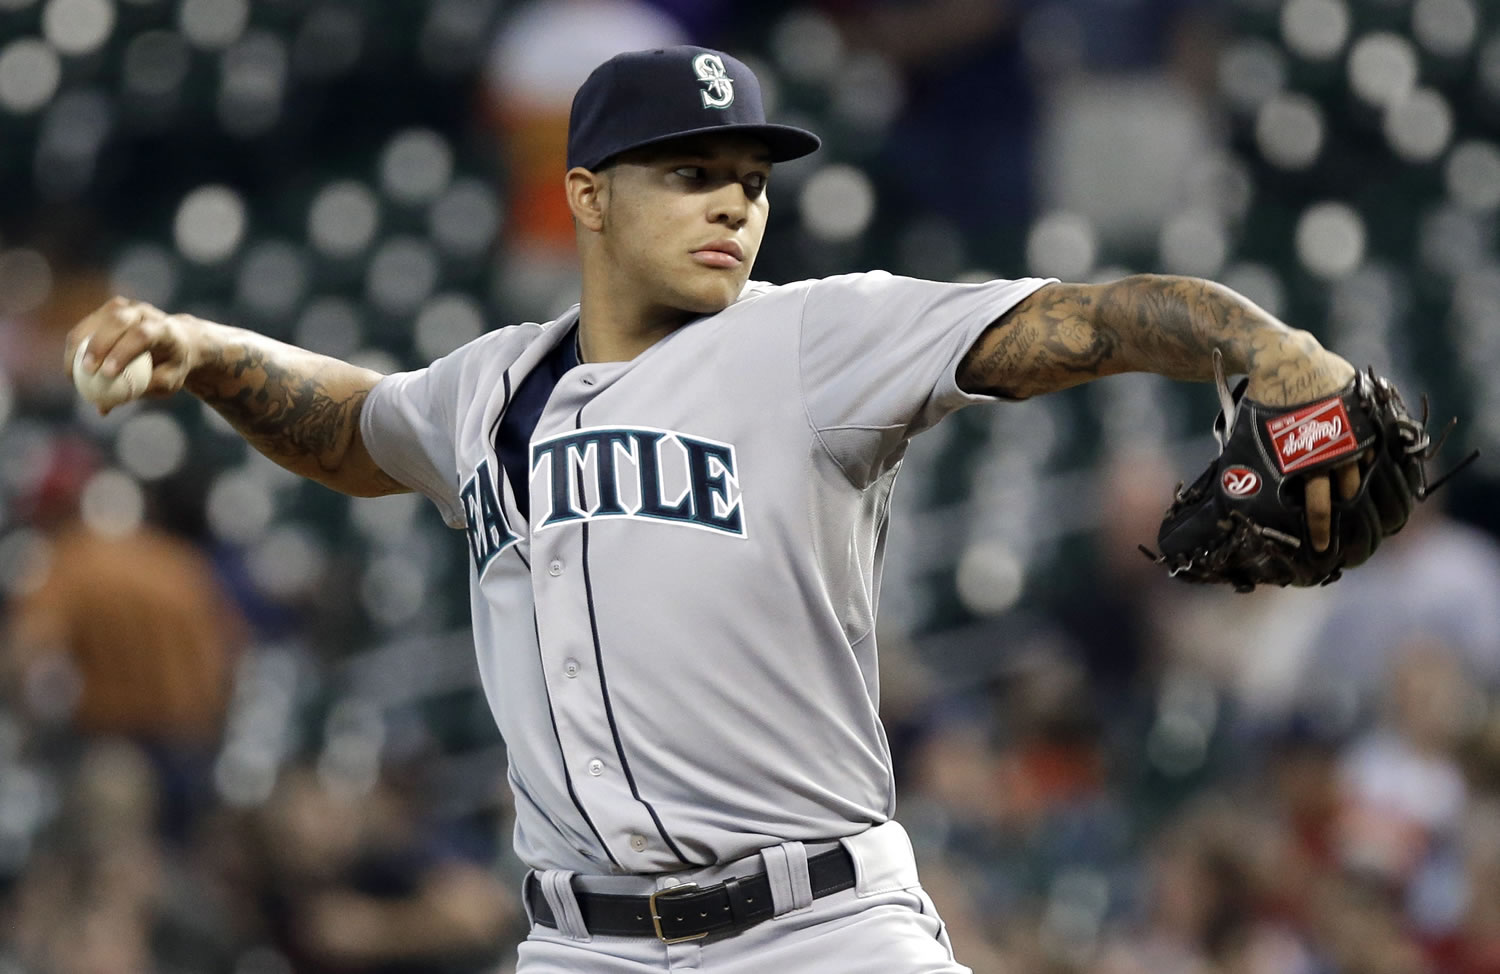 Seattle Mariners' Taijuan Walker delivers a pitch against the Houston Astros in the first inning of a baseball game on Friday, Aug. 30, 2013, in Houston.